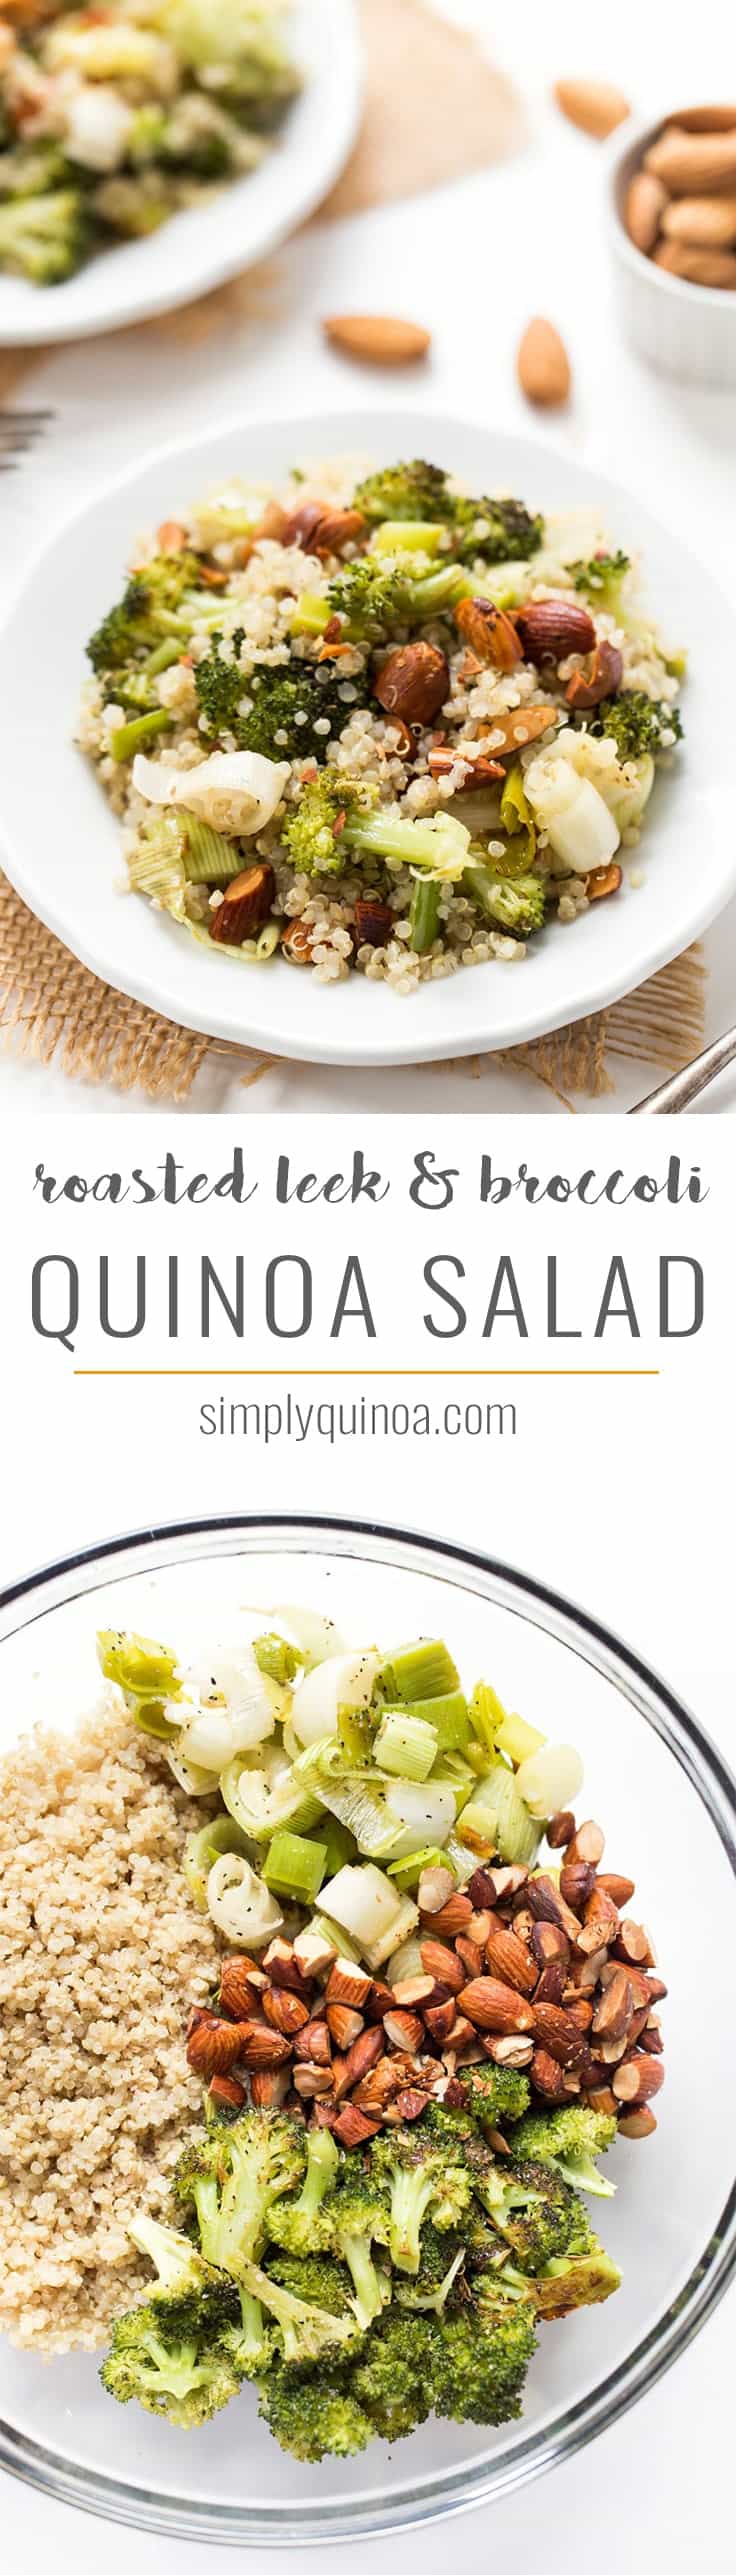 This Roasted Leek & Broccoli Quinoa Salad is light and flavorful with a honey-lemon dressing! Perfect as a summer side, but easily bulked up with a protein!